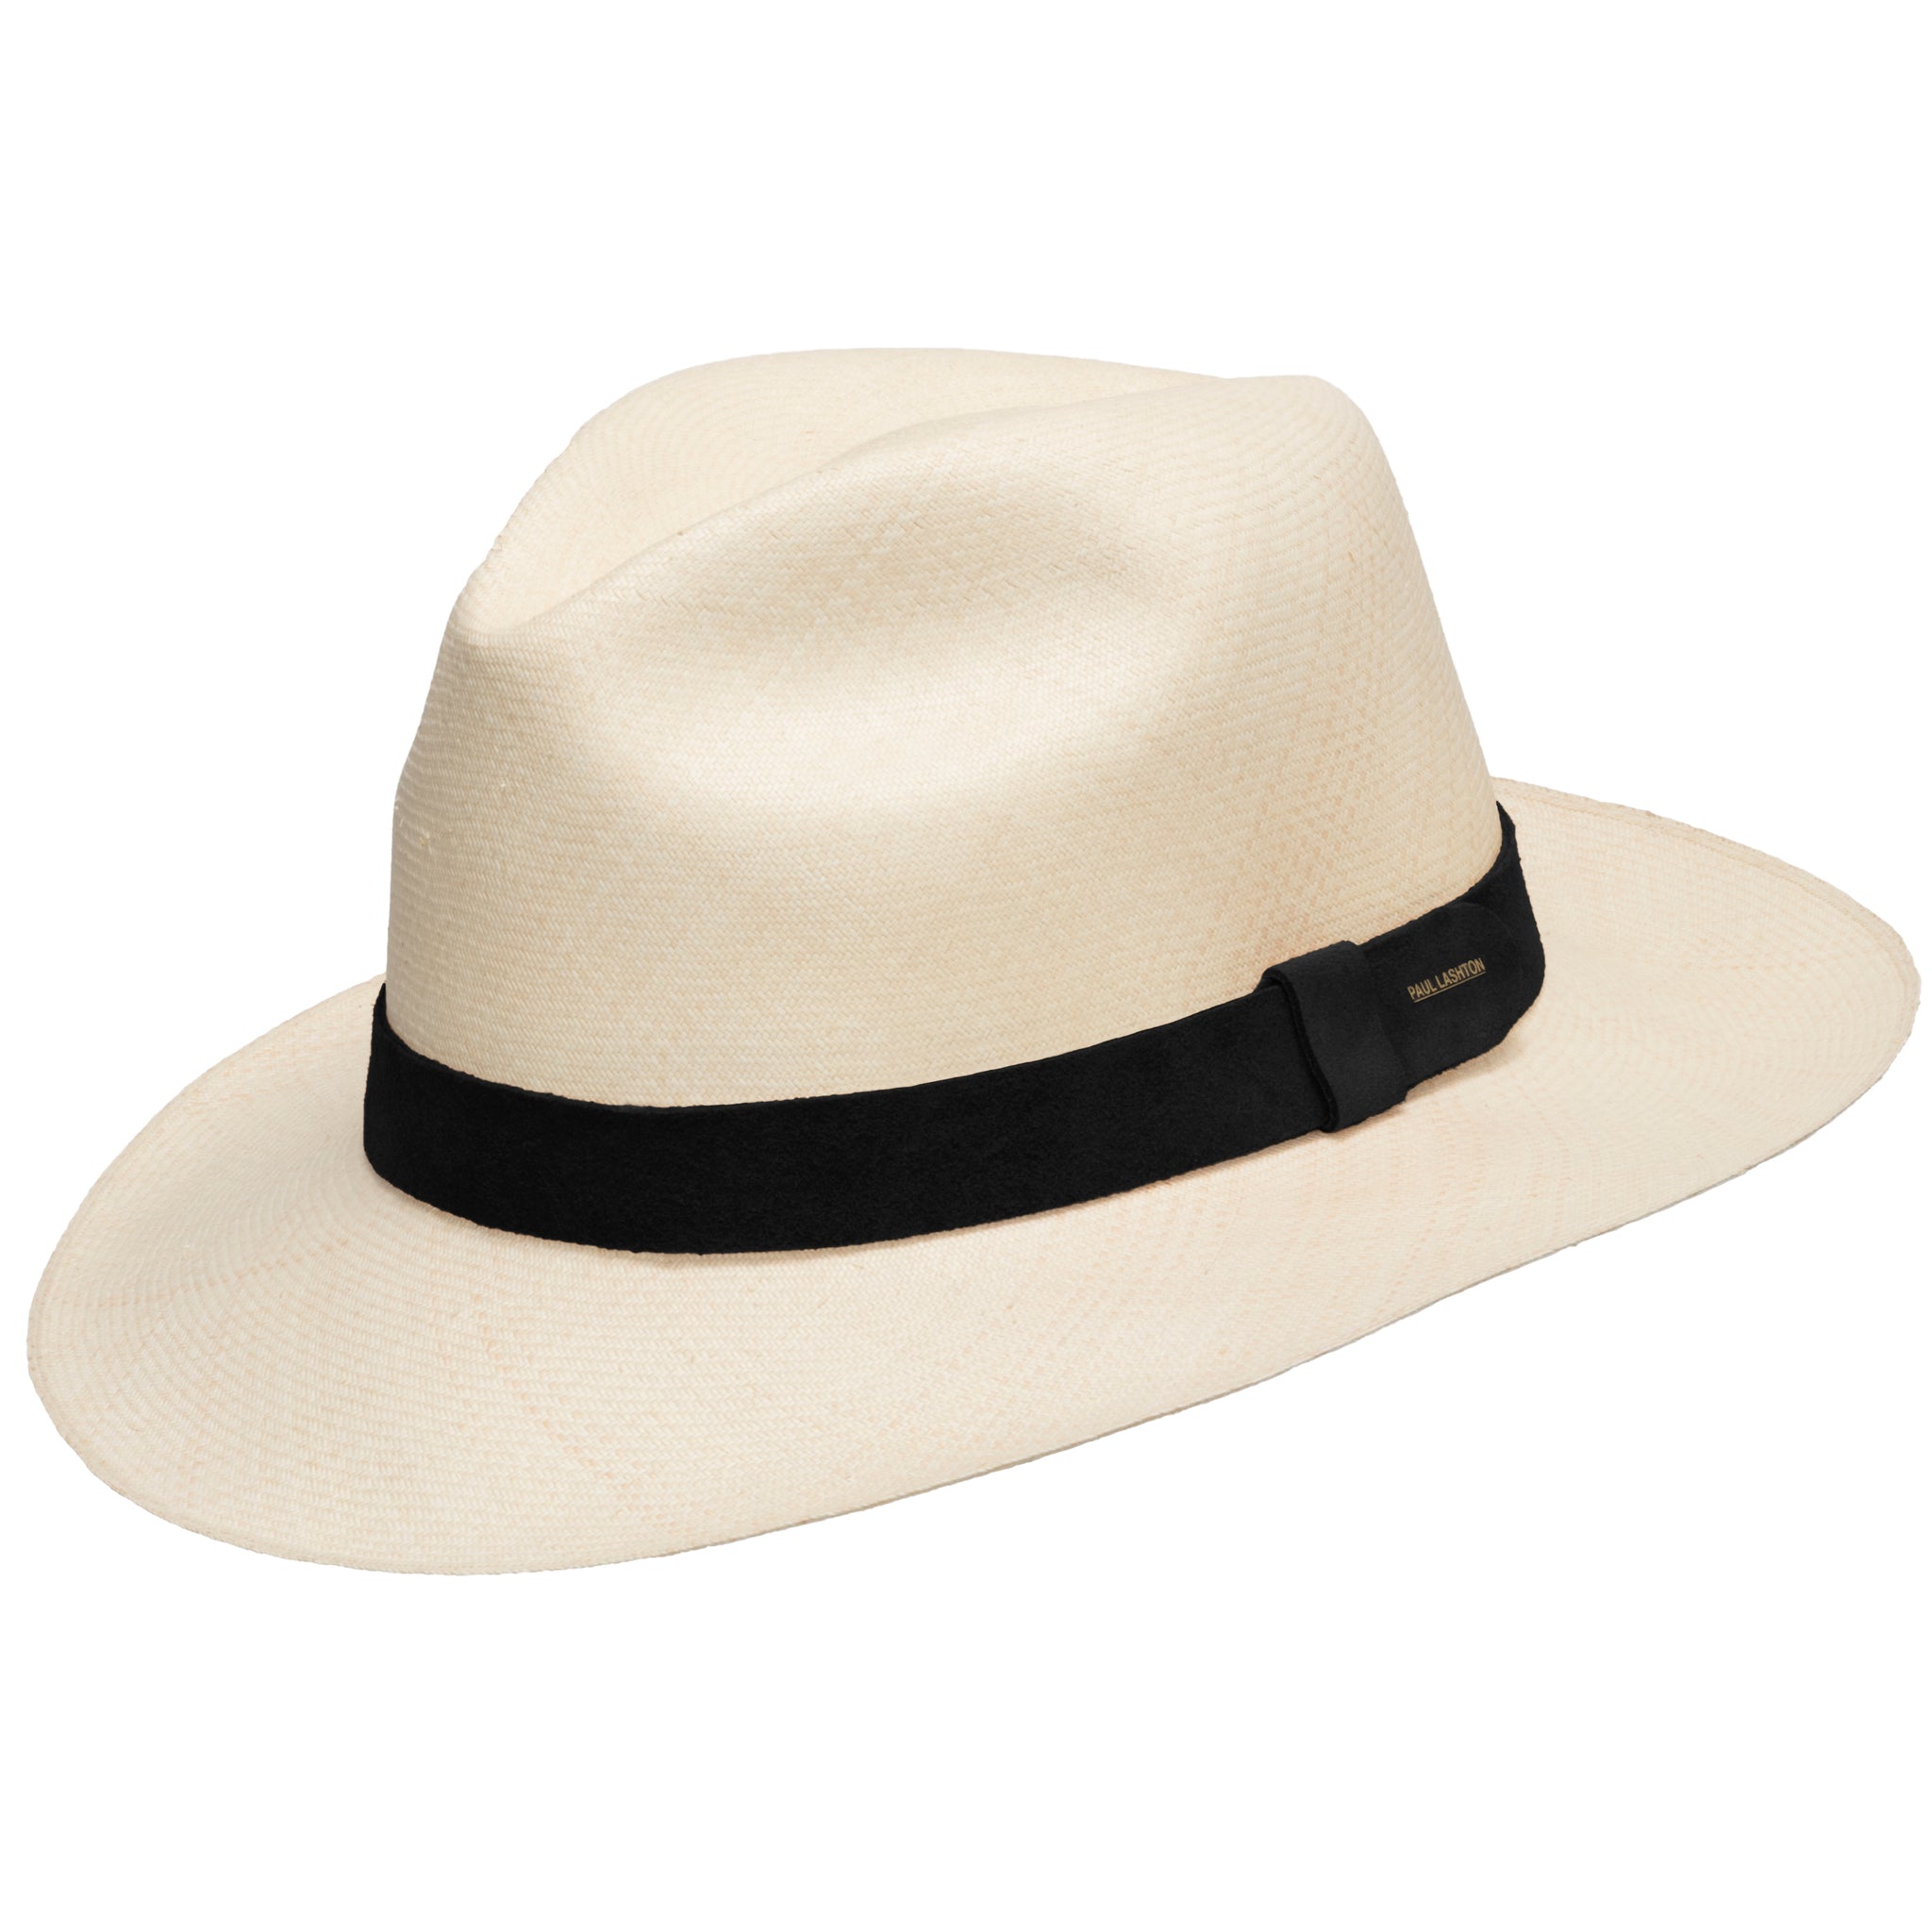 Tandy Leather Suede Adjustable Hatband Brown